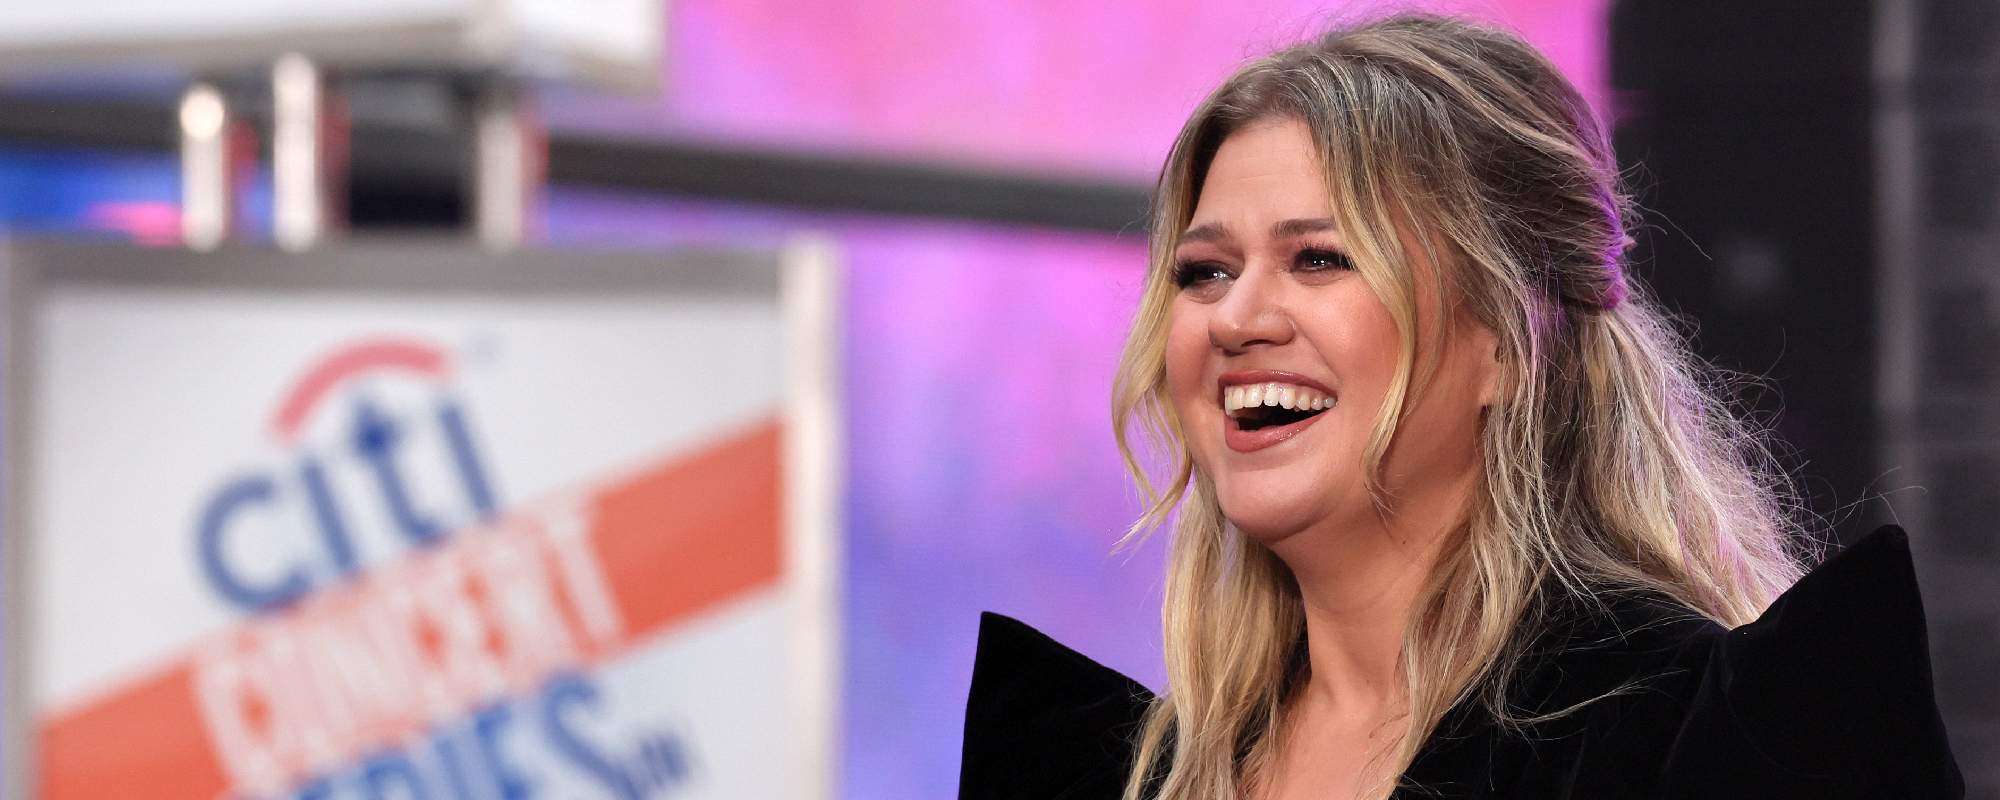 Kelly Clarkson Showcases Range With Powerful Cover of Ronnie Milsap’s “It Was Almost Like a Song”